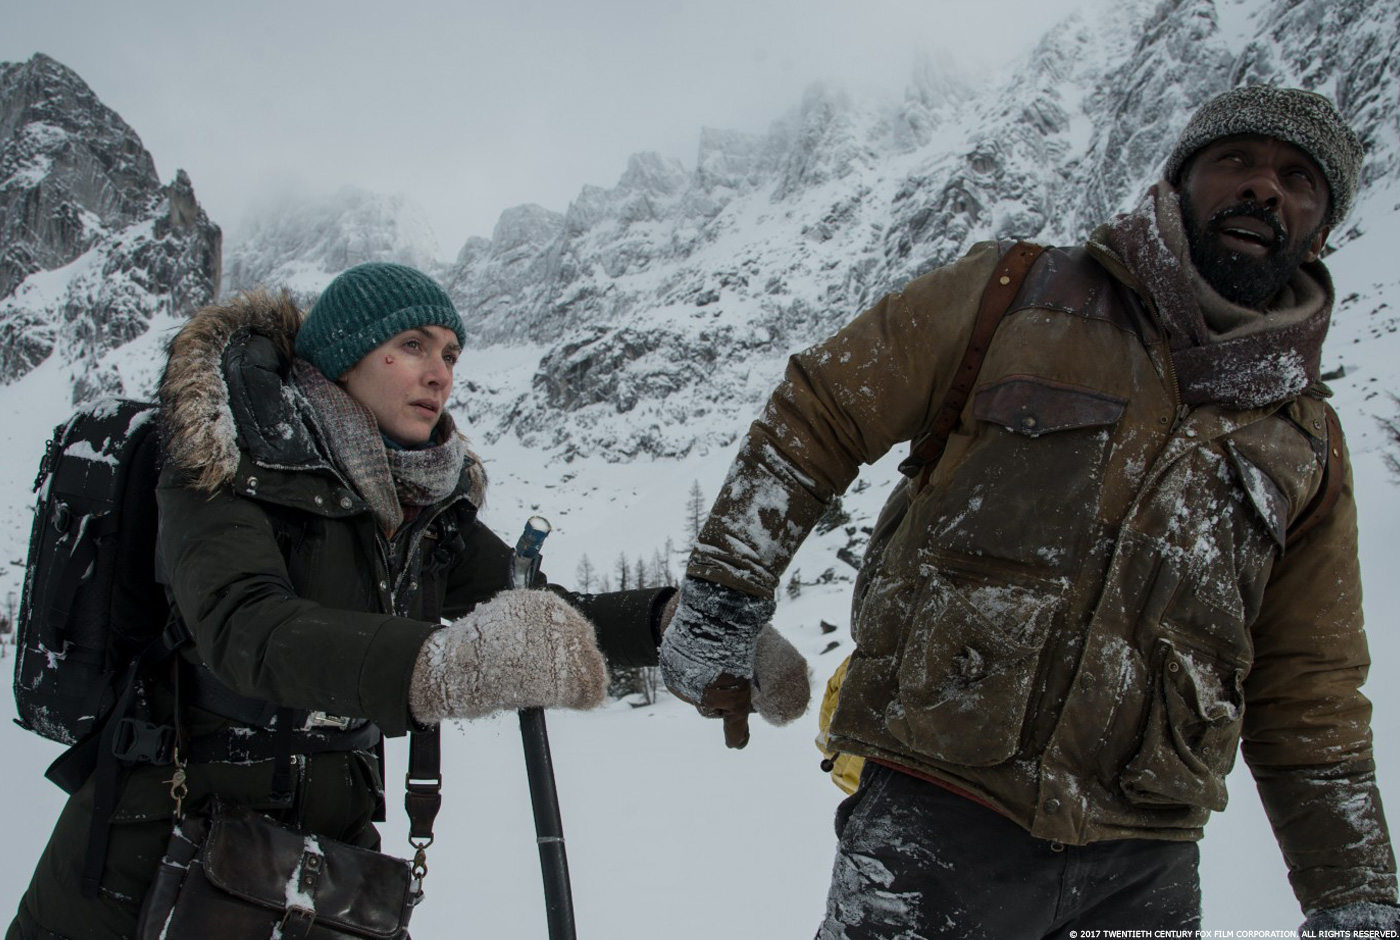 THE MOUNTAIN BETWEEN US: Kevin Hahn - VFX Supervisor - MPC - The Art of VFXThe Art of VFXTHE MOUNTAIN BETWEEN US: Kevin Hahn - VFX Supervisor - MPC - The Art of VFX - 웹